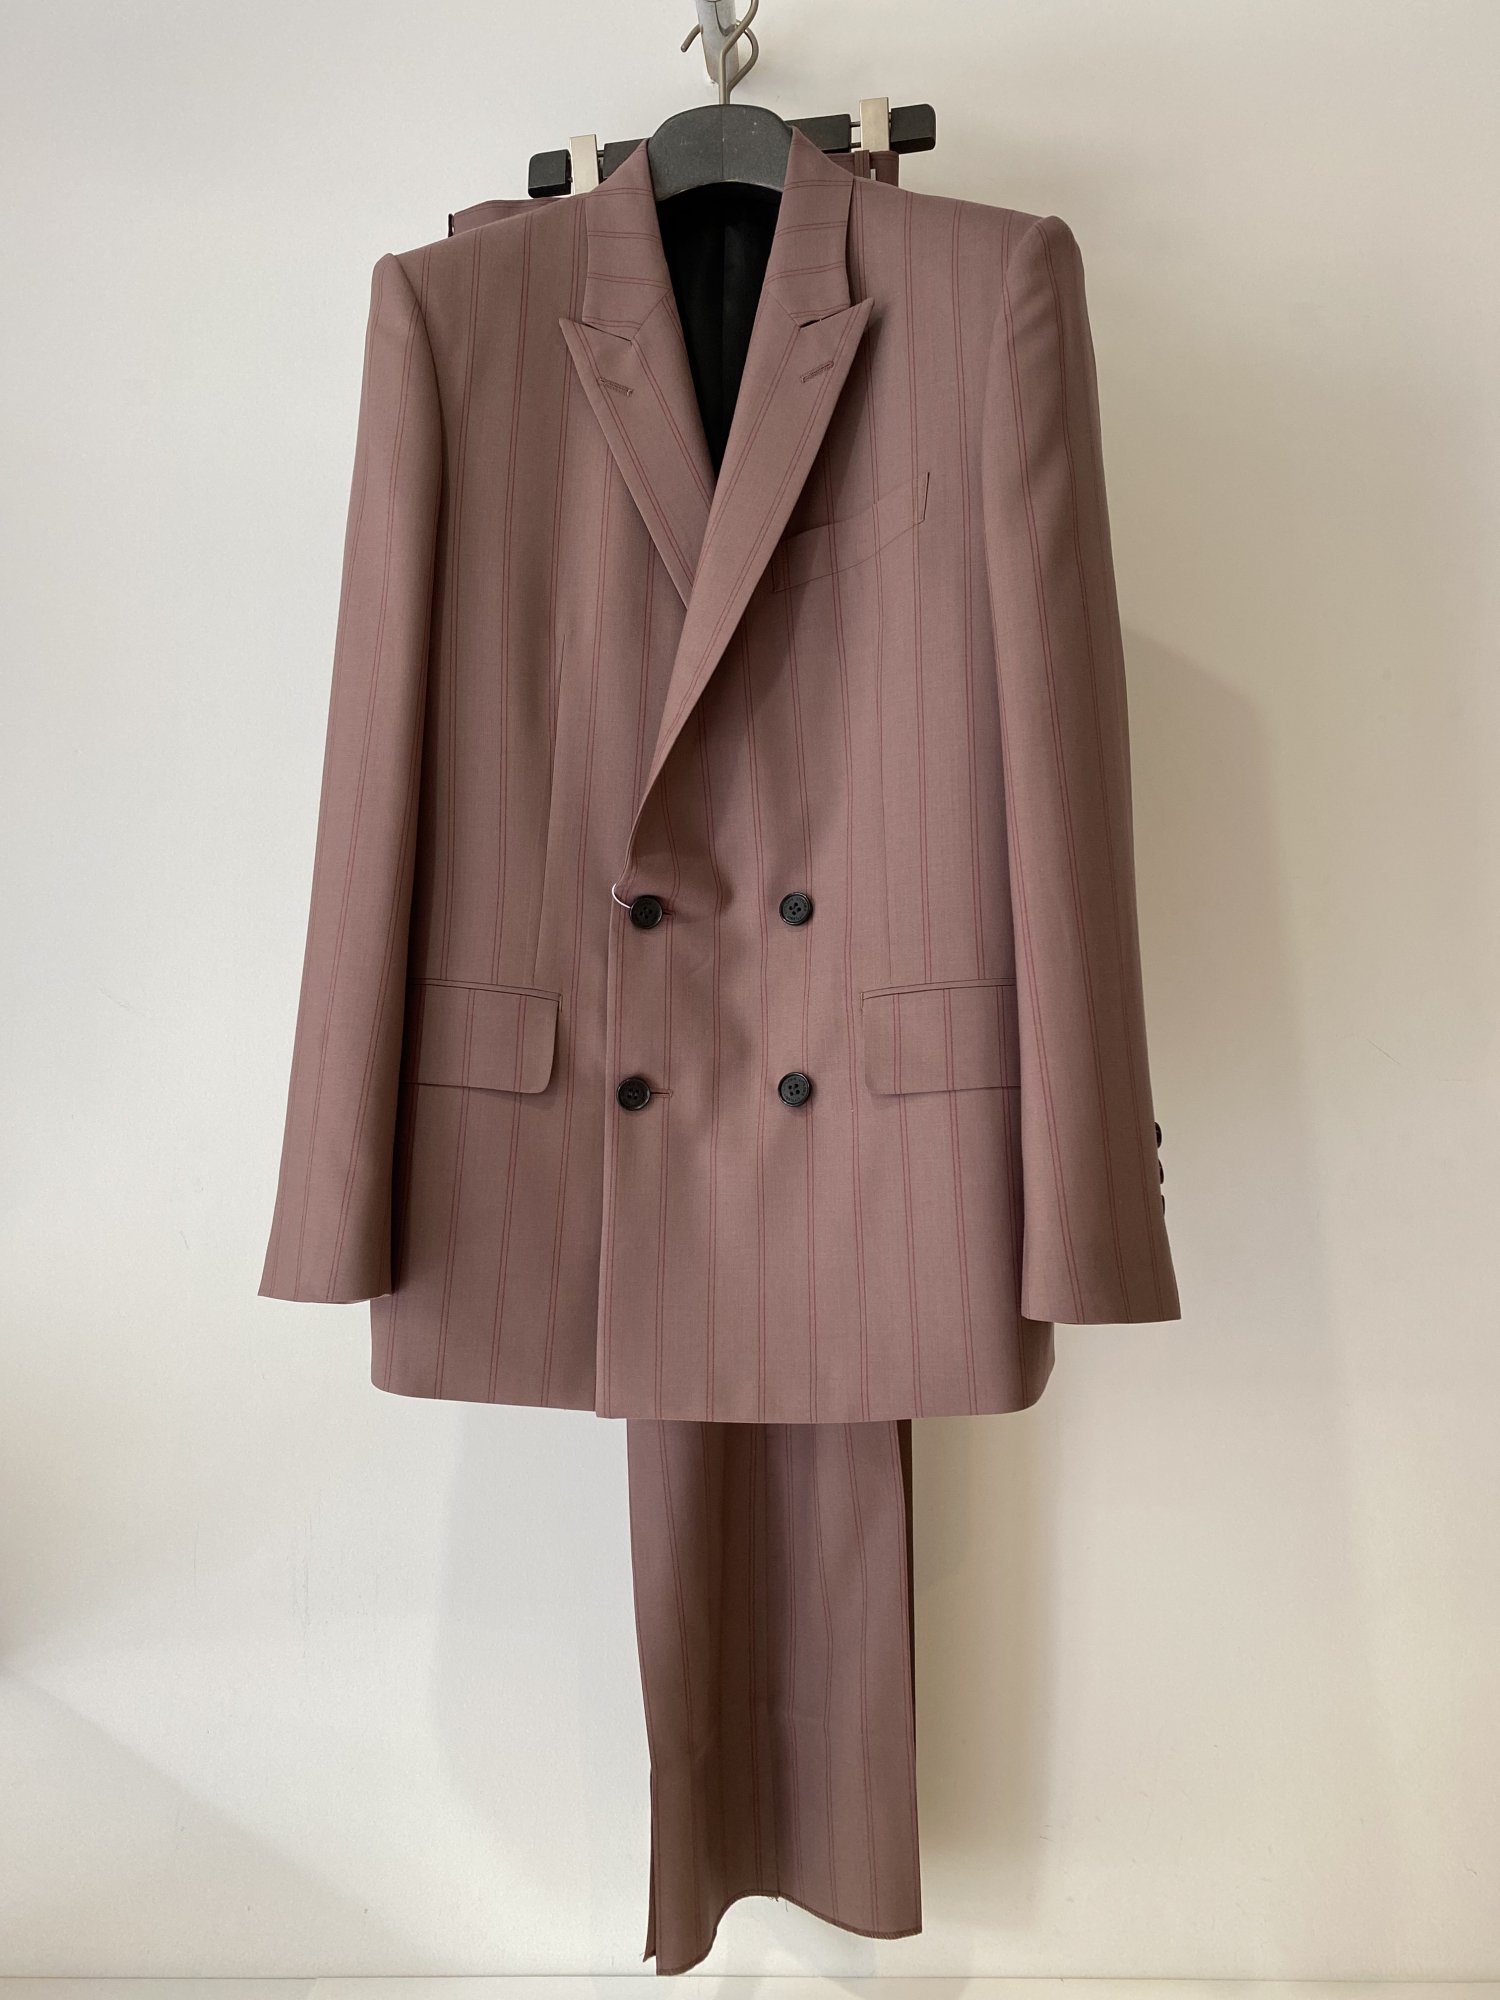 LITTLEBIG<br />4B Double Breasted Jacket & Tucked Flare Trousers SET / Pink<img class='new_mark_img2' src='https://img.shop-pro.jp/img/new/icons14.gif' style='border:none;display:inline;margin:0px;padding:0px;width:auto;' />